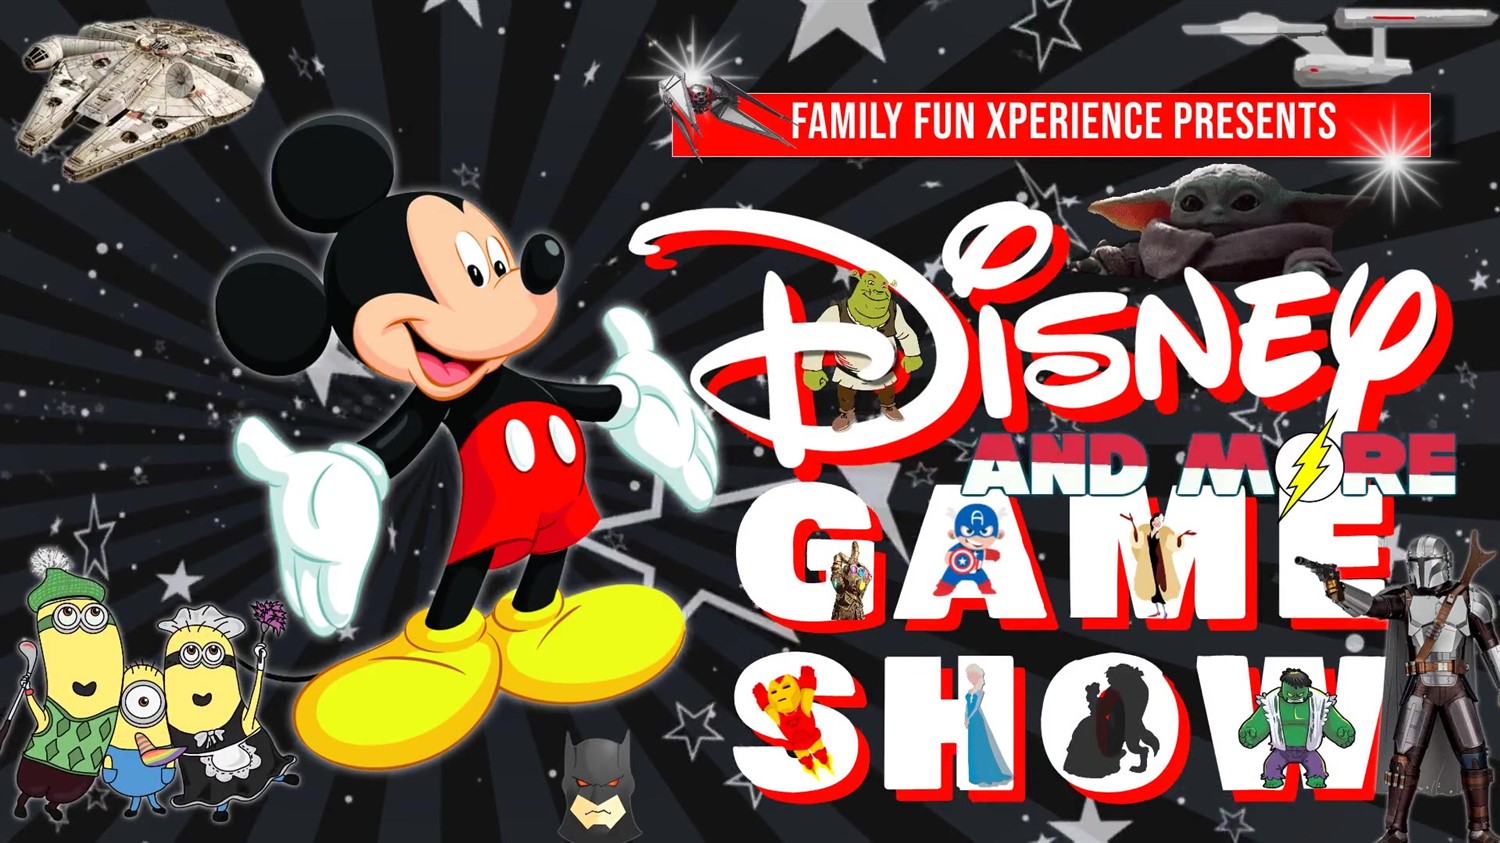 DISNEY & MORE GAME SHOW Animation, movies, sci-fi, superheroes, & much more! on ago. 23, 19:00@FFX Theatre - Pick a seat, Buy tickets and Get information on Family Fun Xperience tickets.ffxshow.org